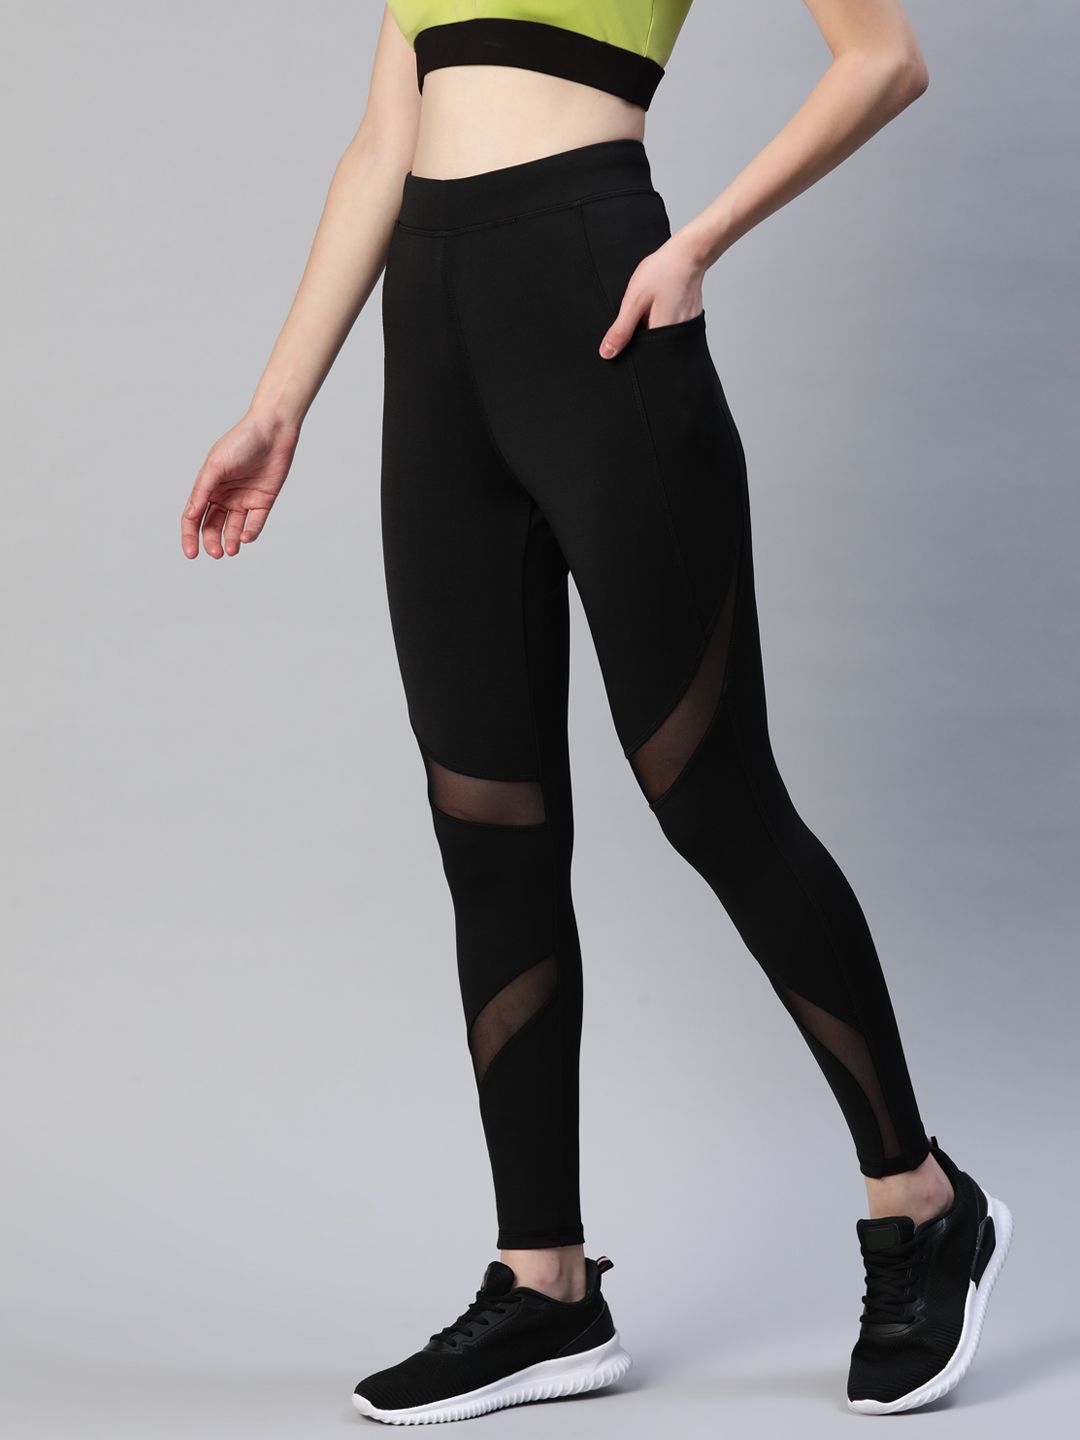 Blinkin Women Black Rapid Dry Tights With Breathable Mesh Panels & Side Pockets Price in India